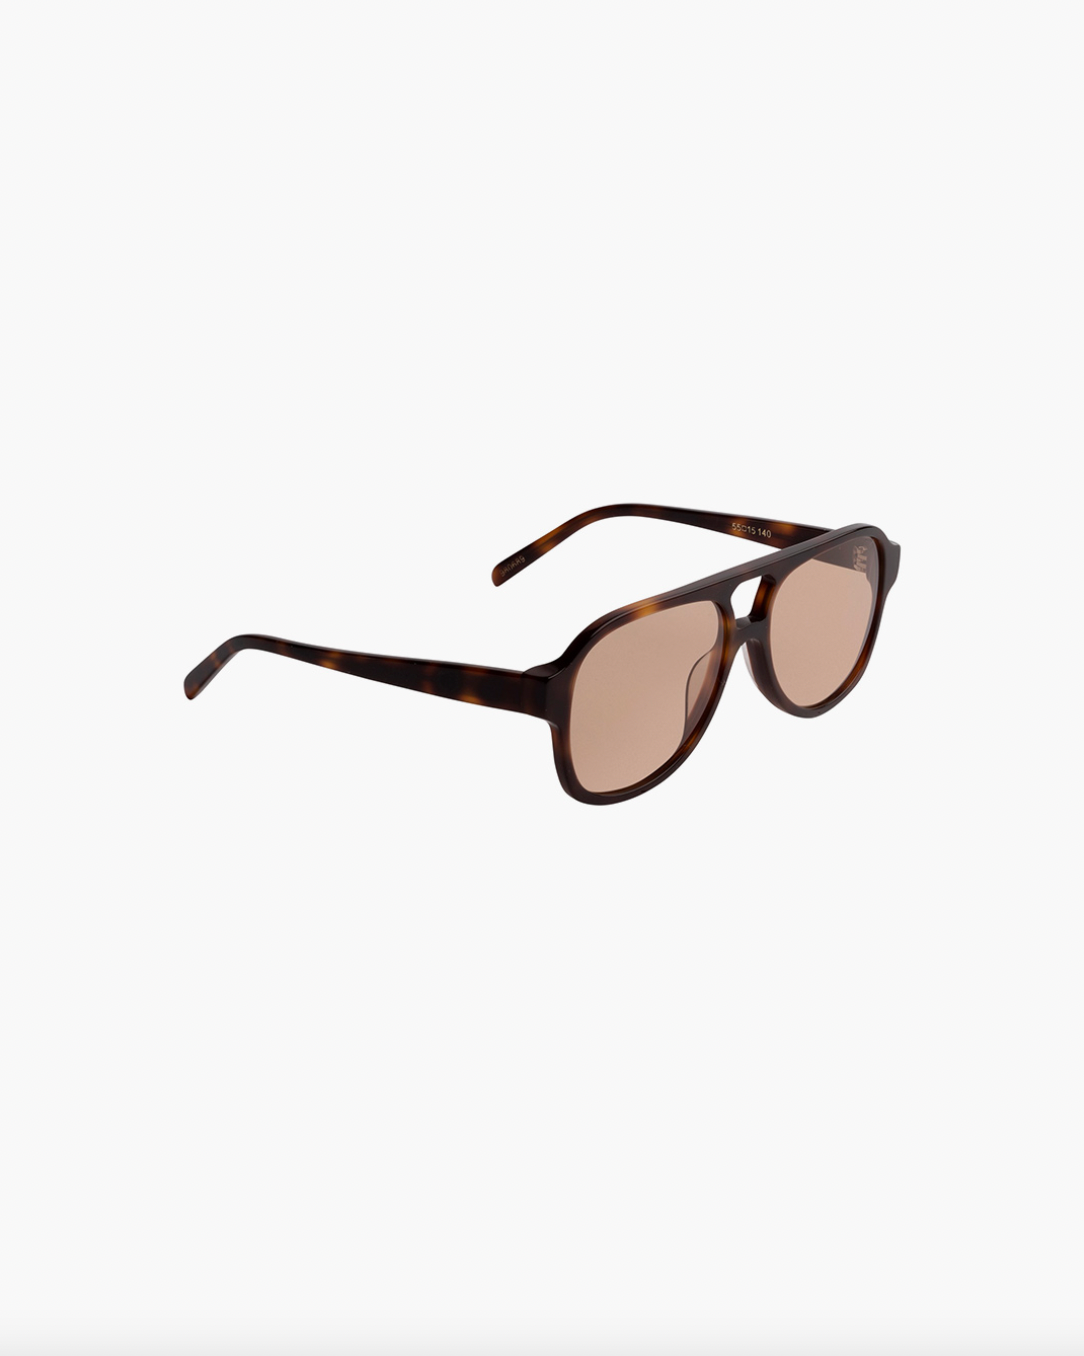 Get ready to turn heads with our Gelo Cinnamon sunglasses by Corlin Eyewear. These sunglasses feature UV protection 400 and scratch-resistant CR39 lenses, perfect for any outdoor activity.